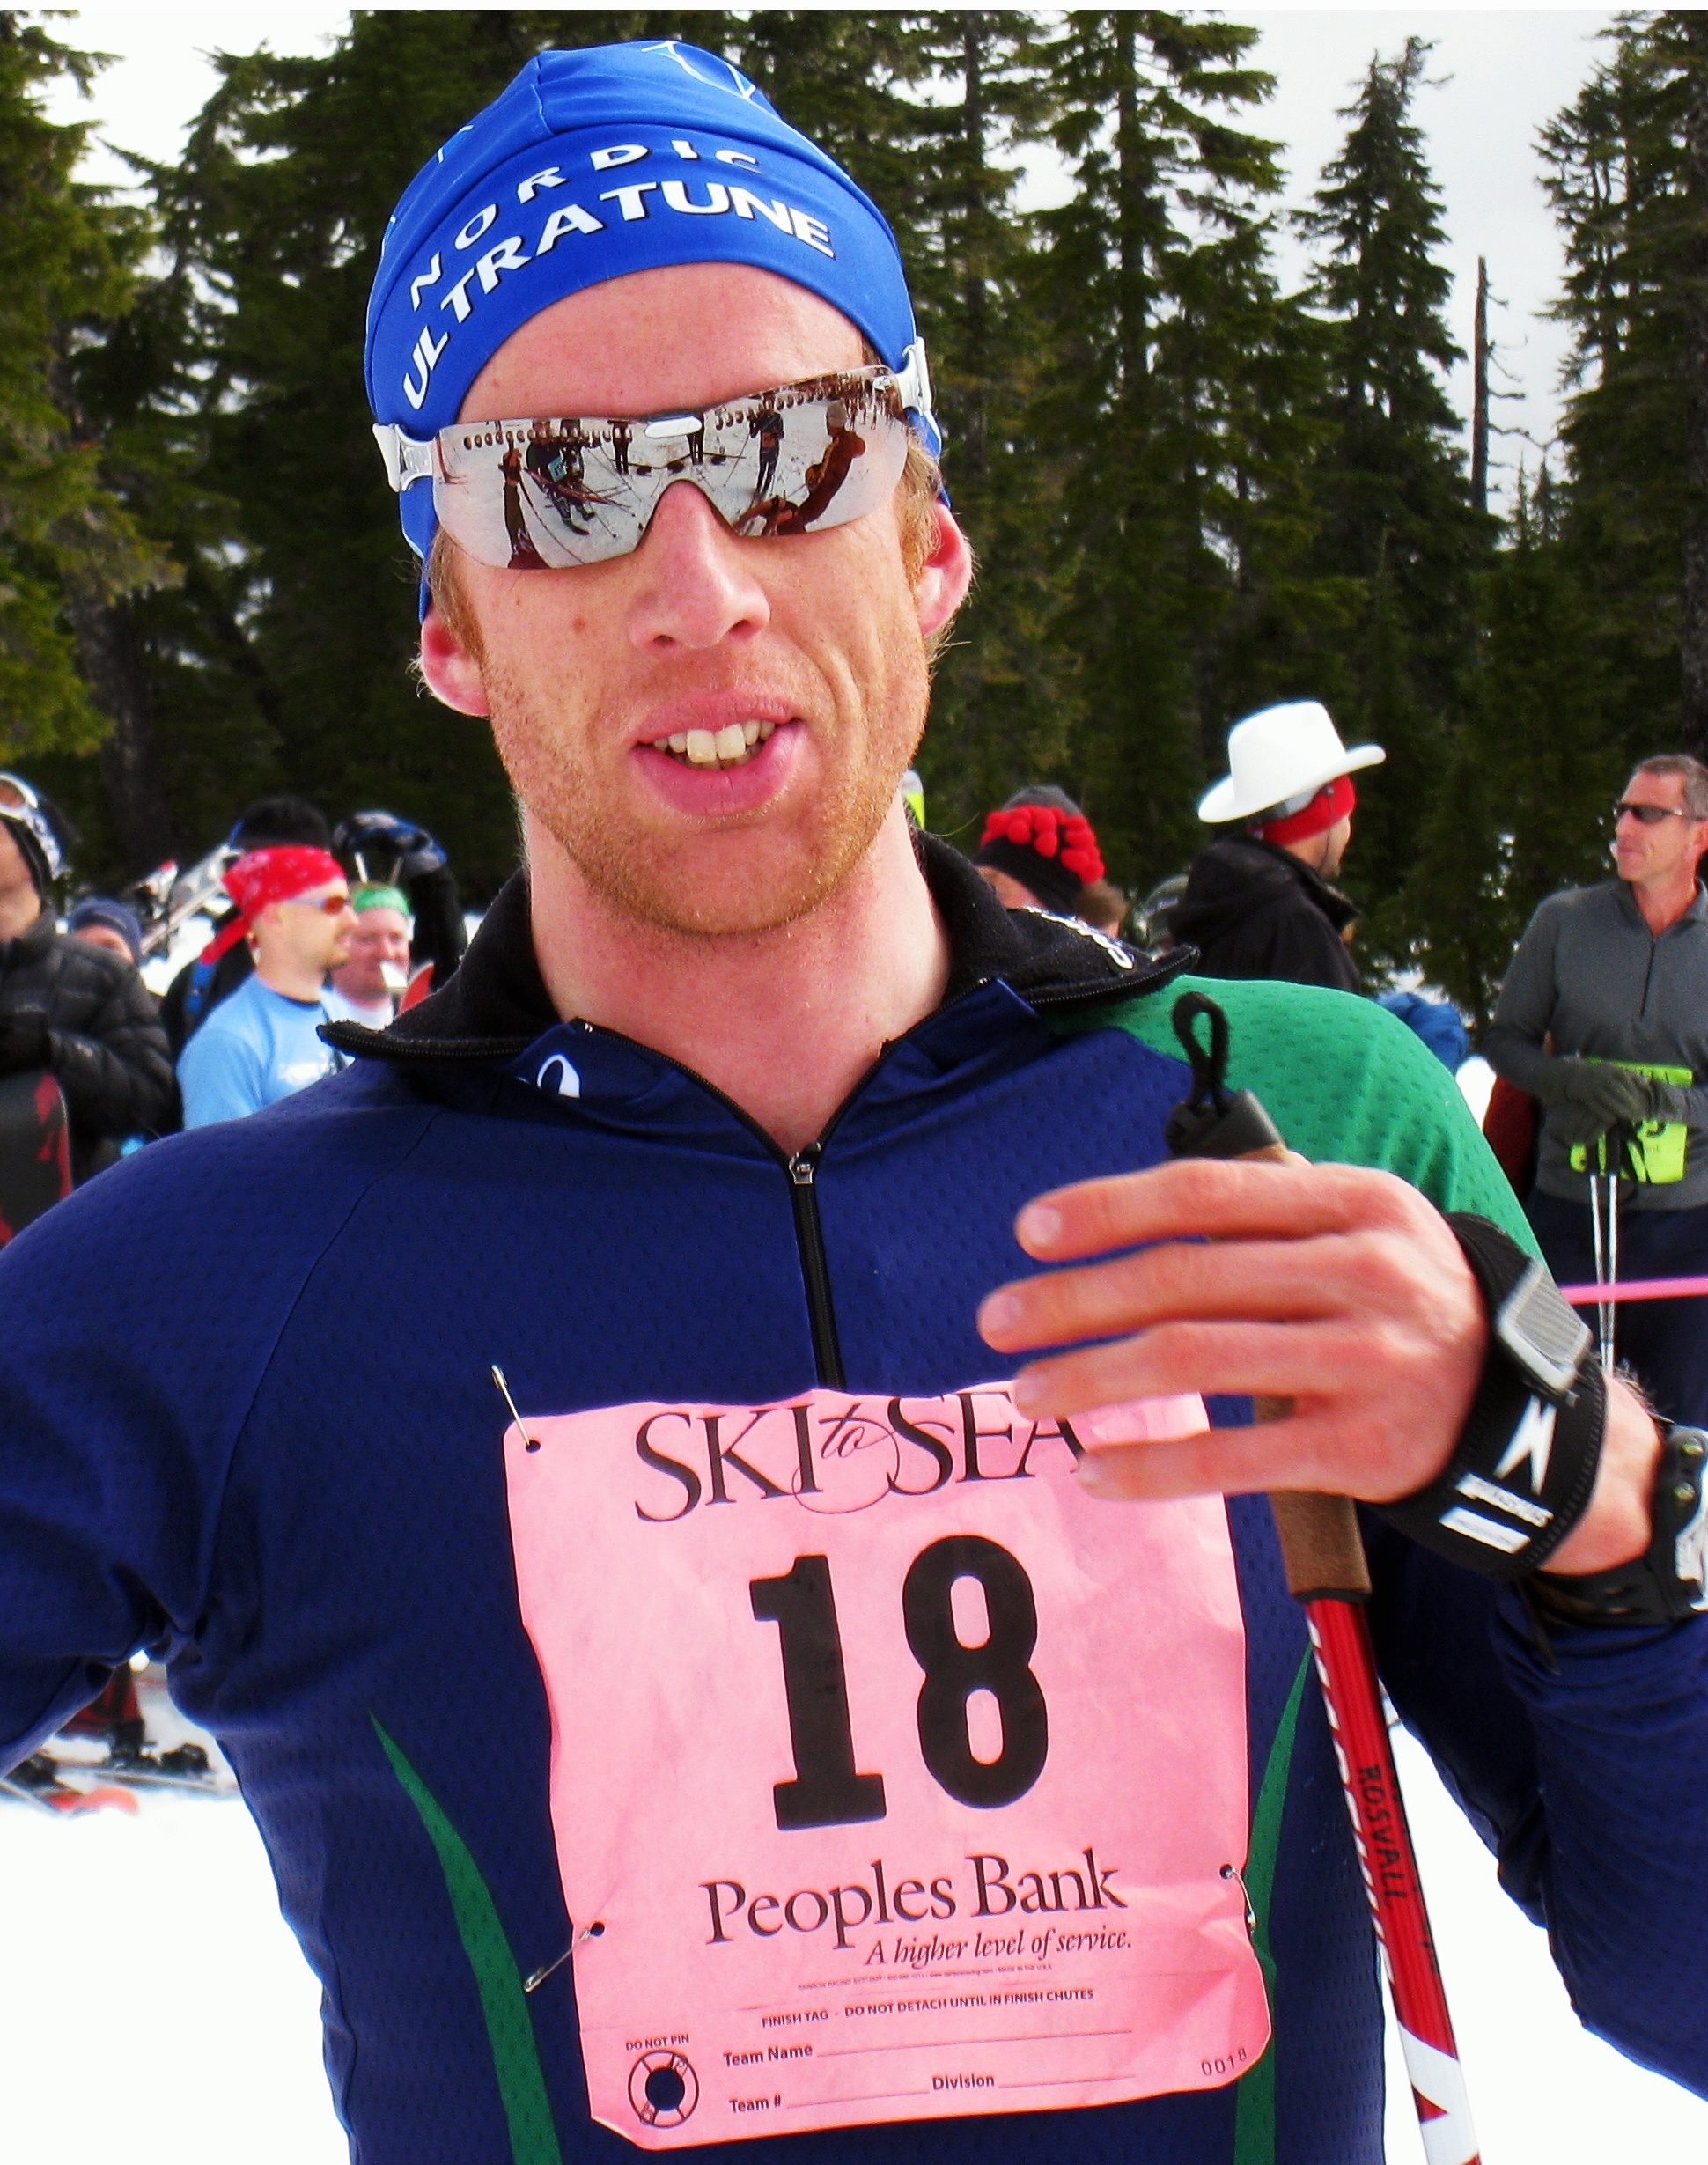 Work and Skiing: Martin Rosvall Challenges the Pros